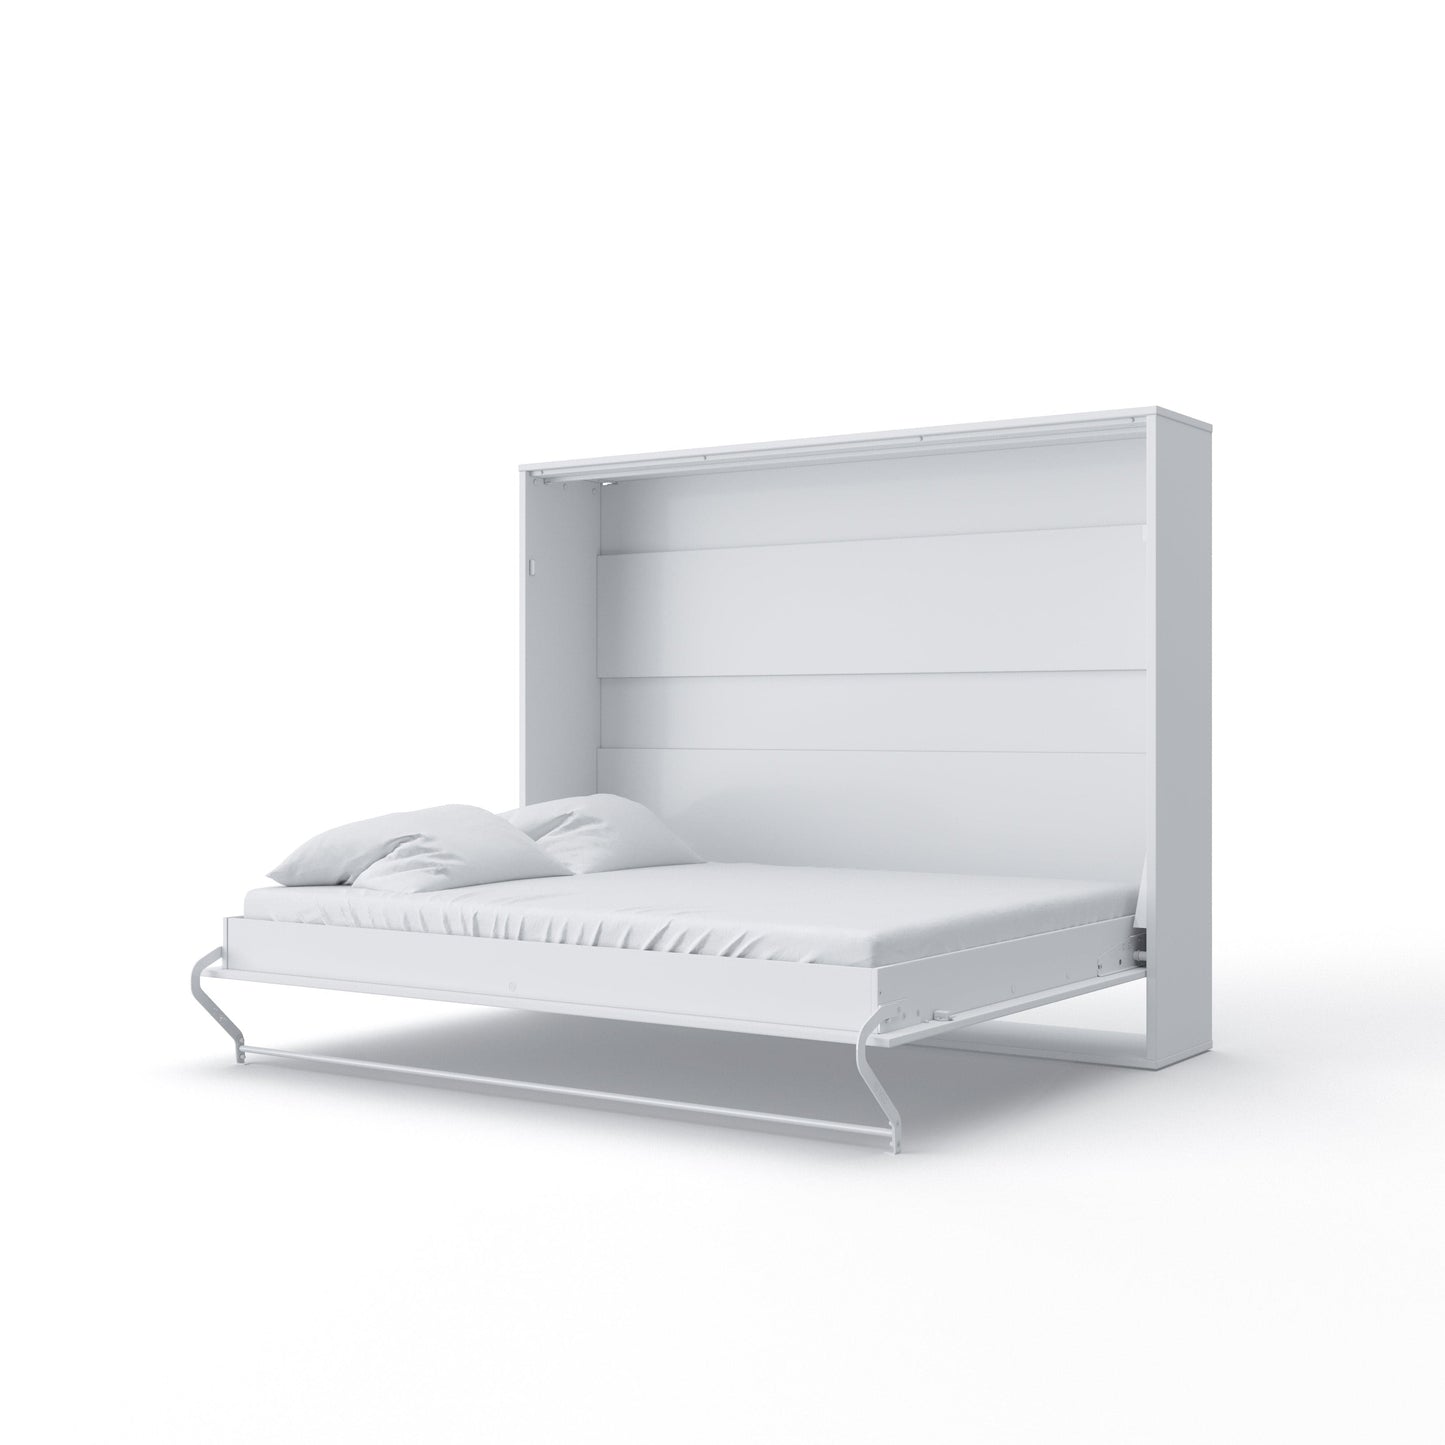 Invento Horizontal Wall Bed, Queen Size